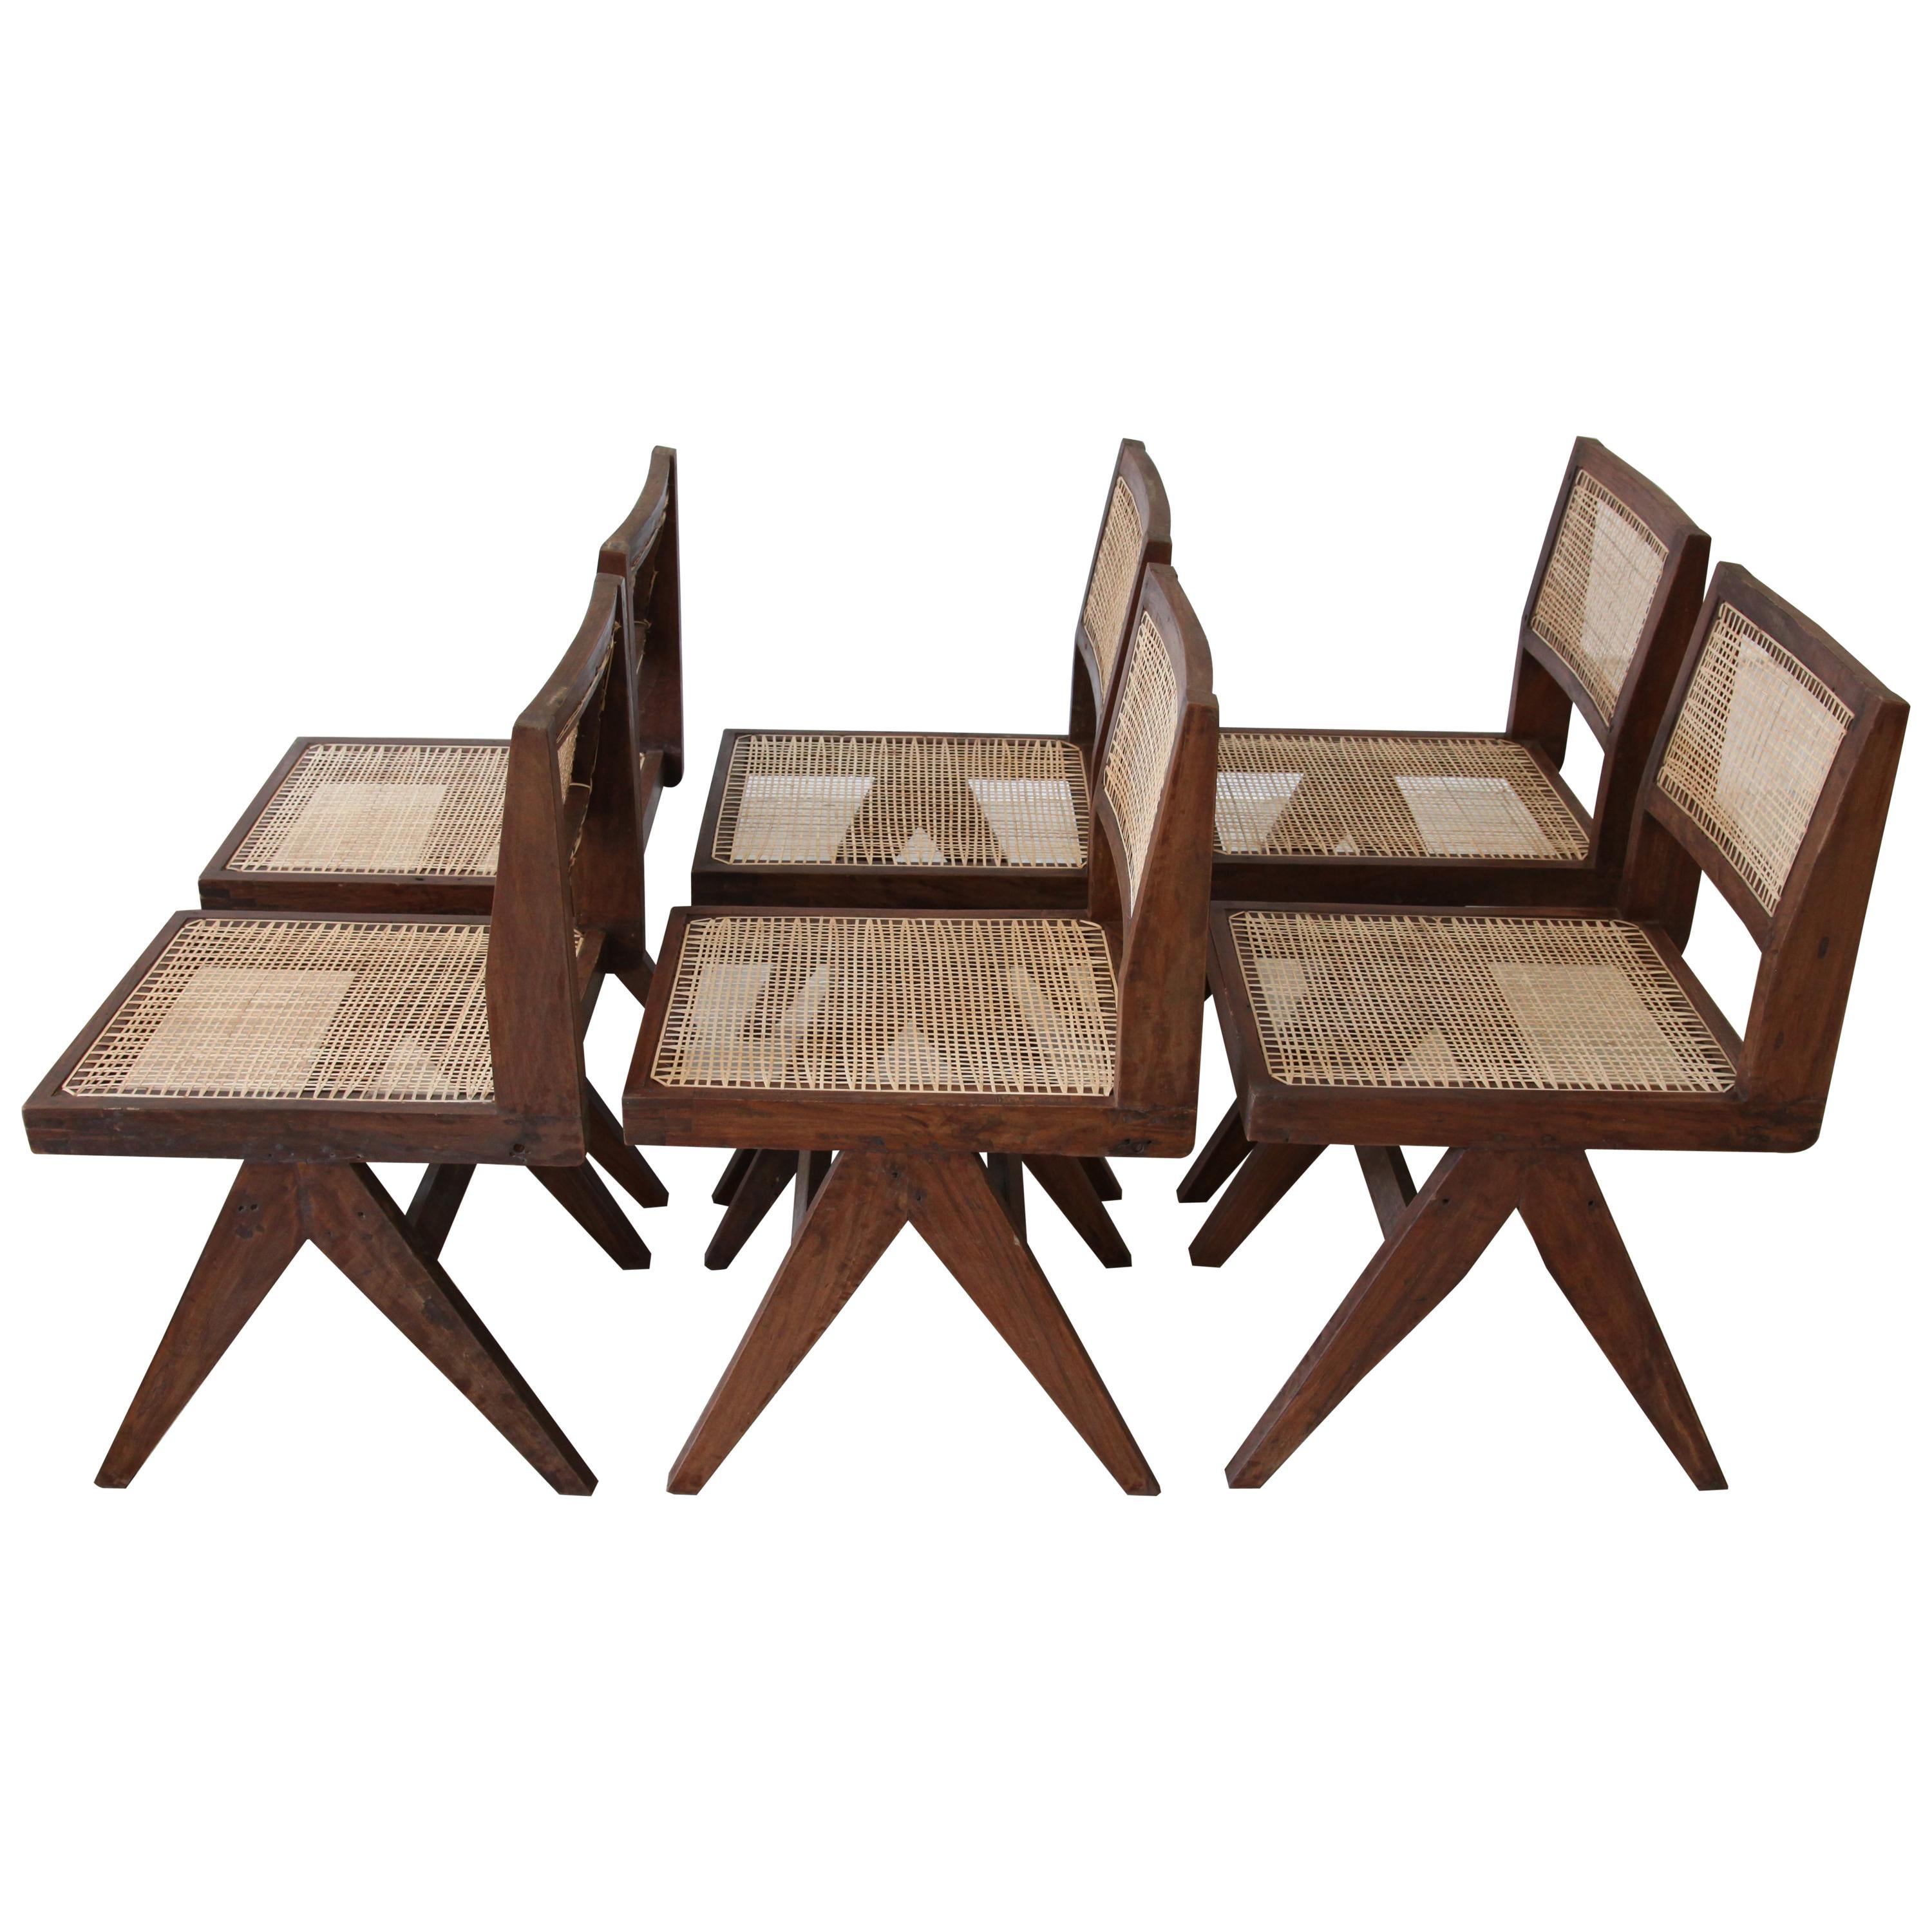 Pierre Jeanneret, Set of 6 Armless V-Leg Chairs from Chandigarh, circa 1955